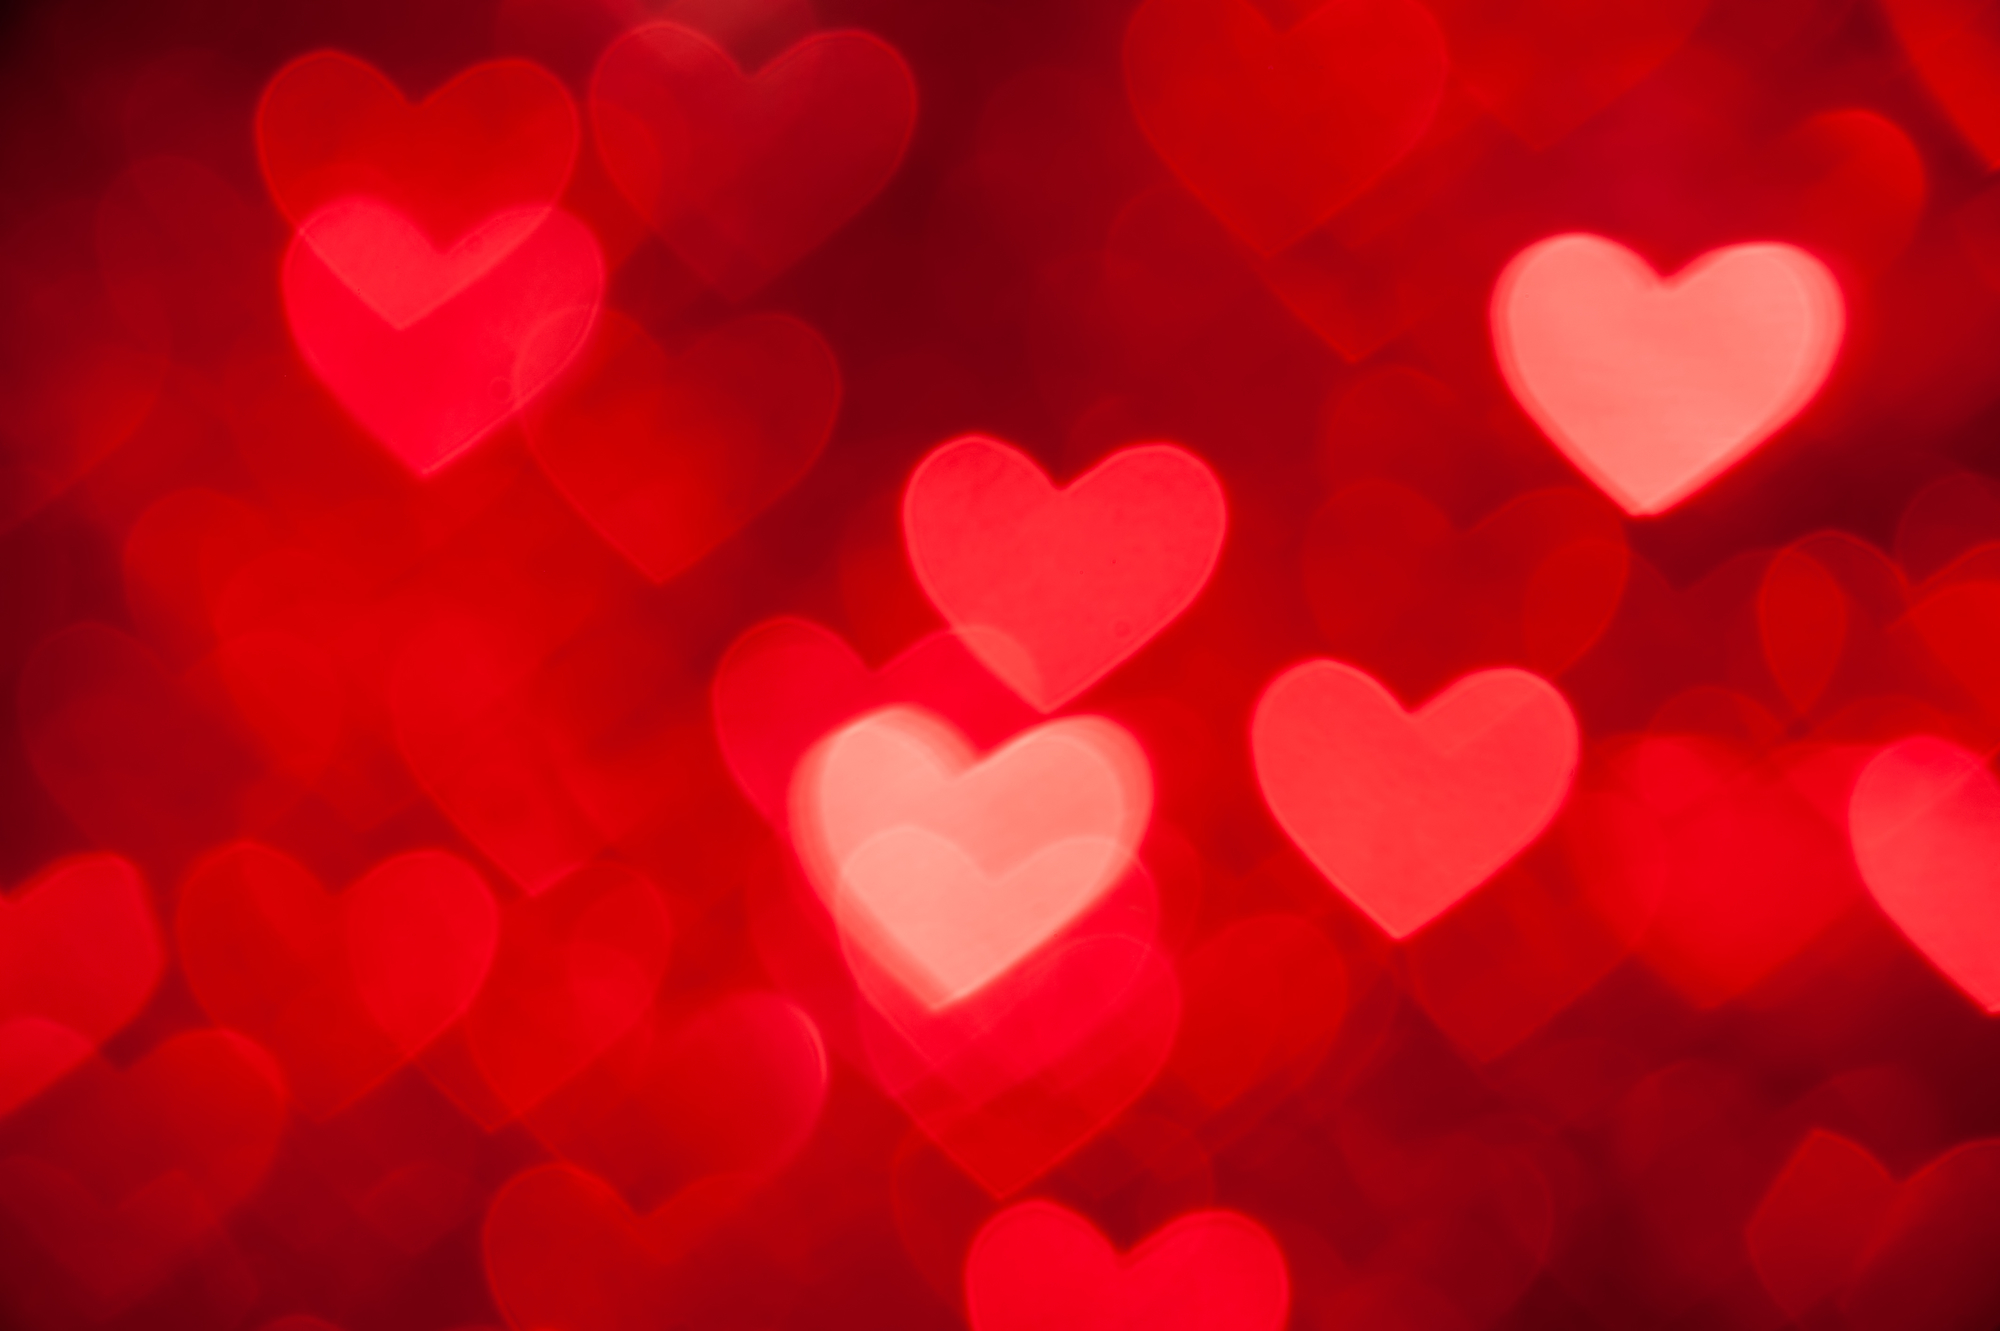 red hearts as background